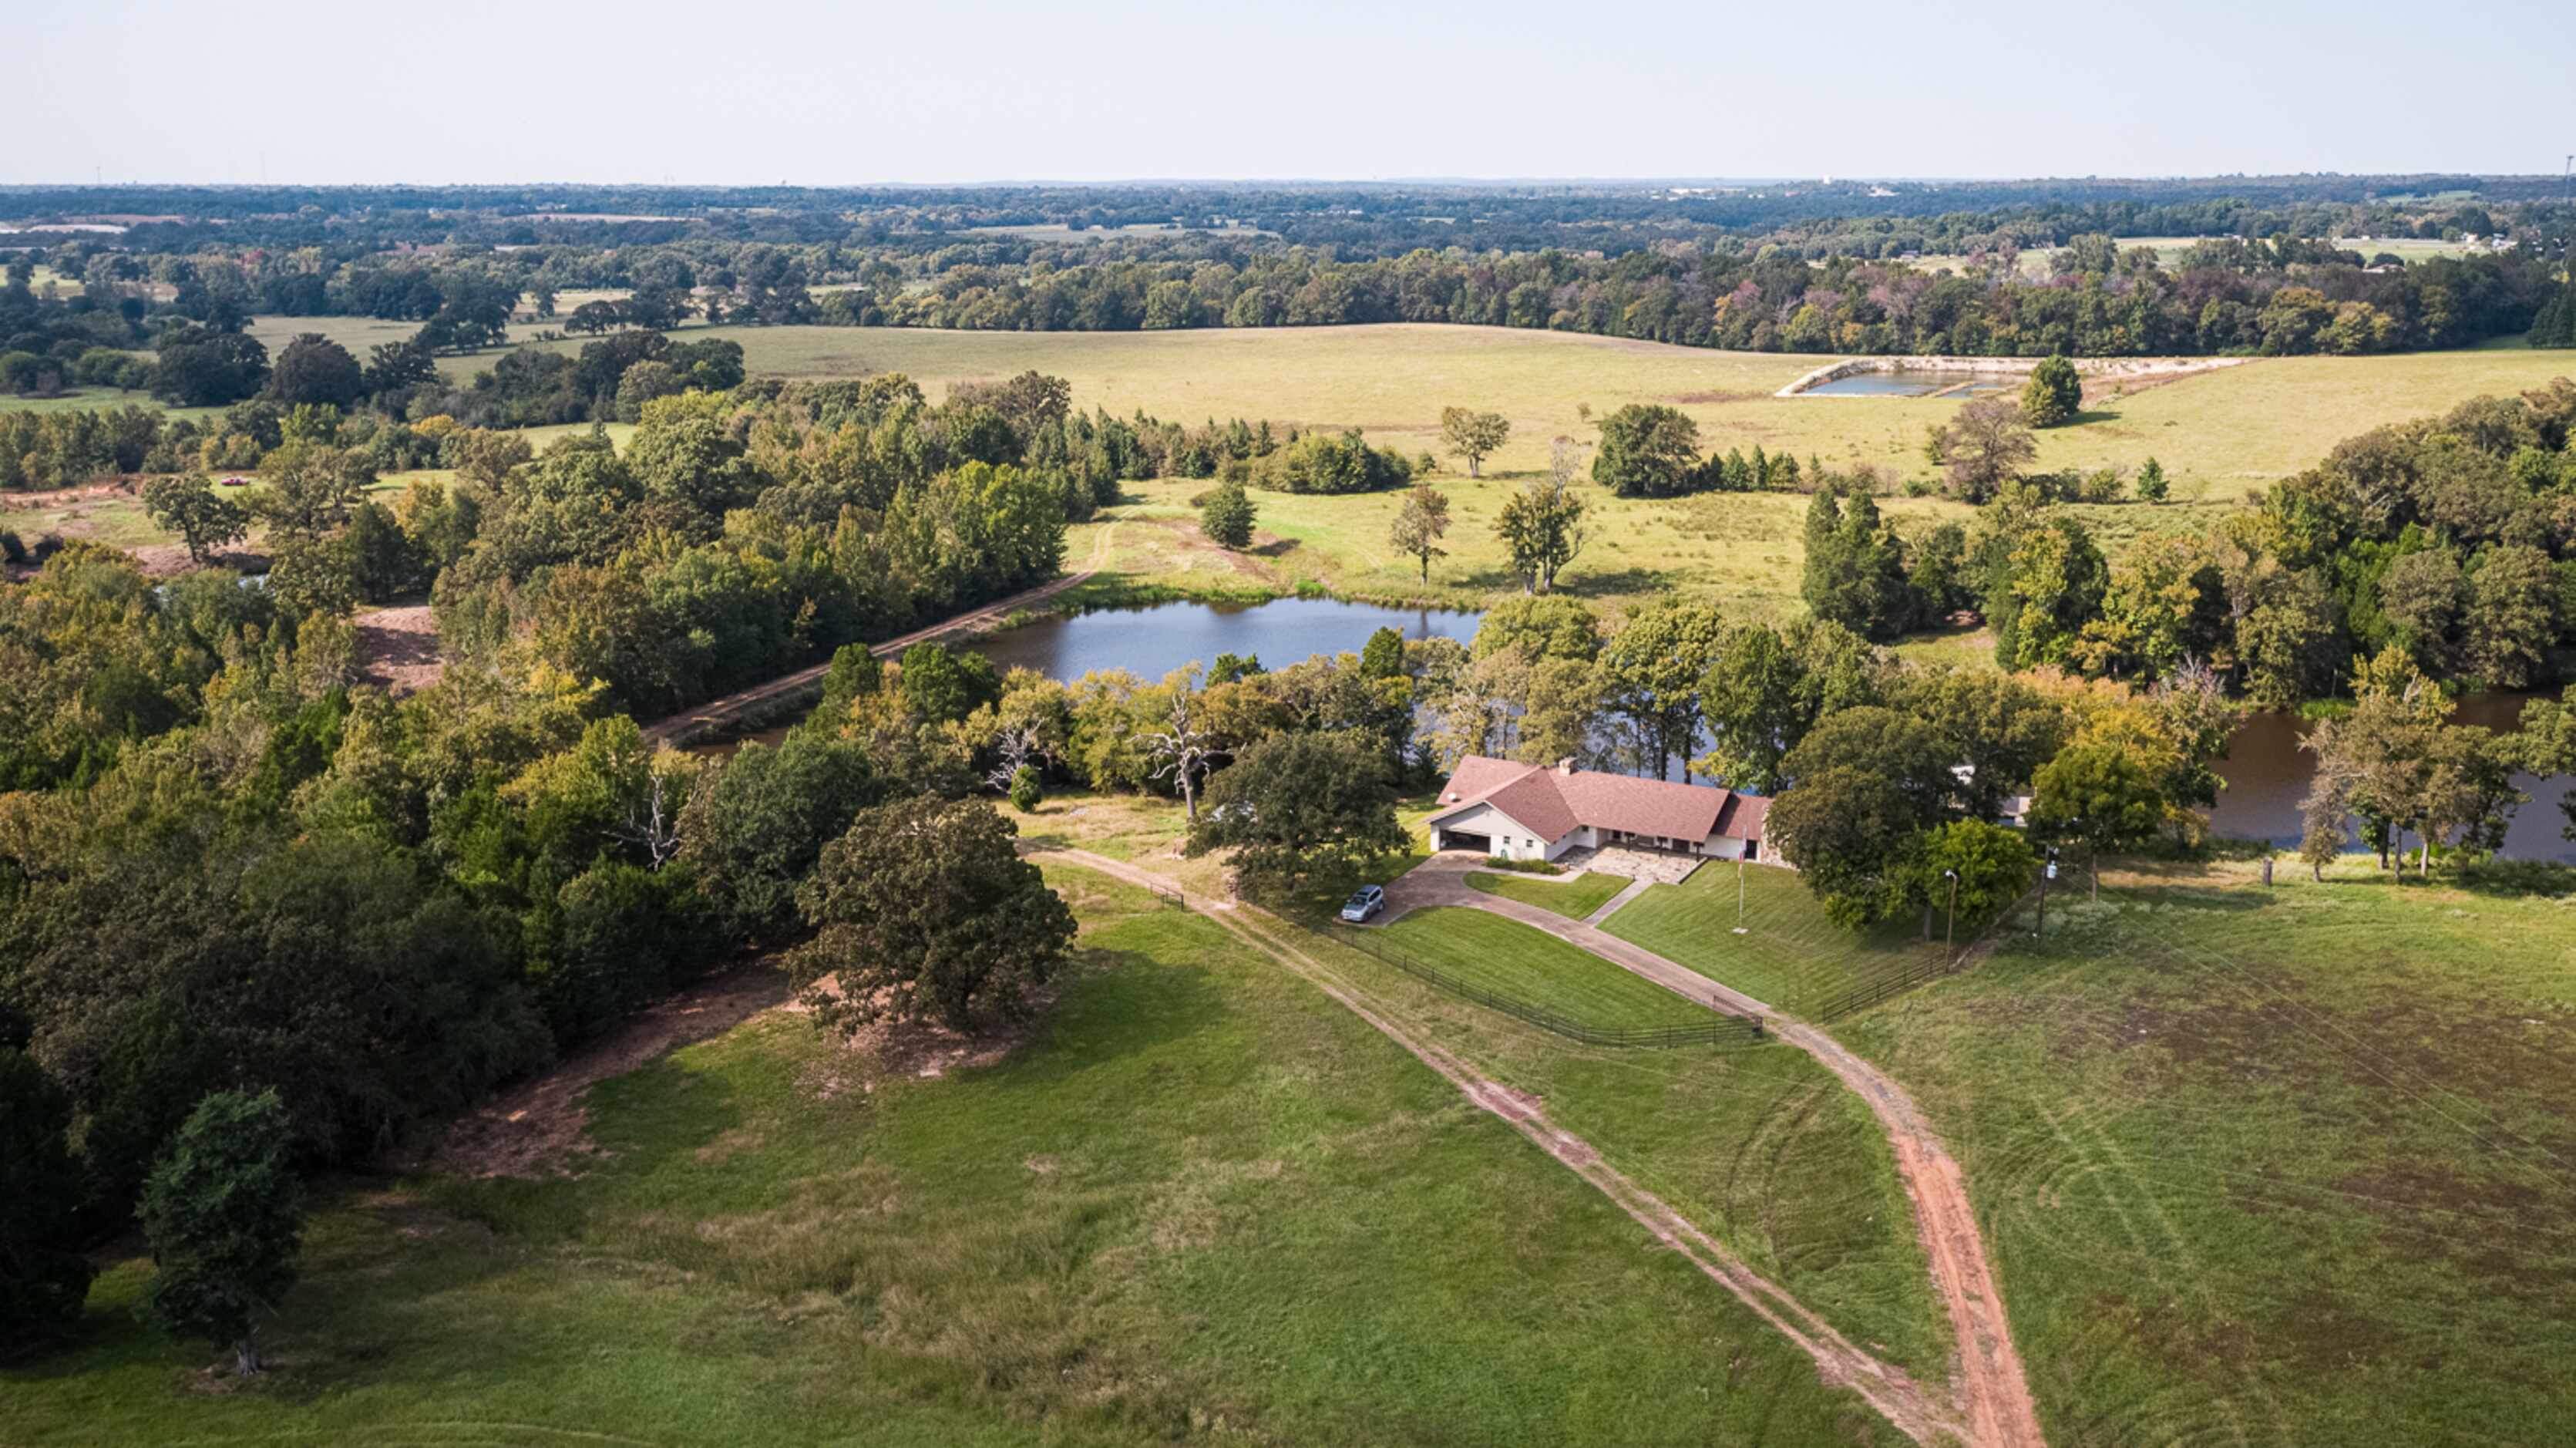 With a 4,000-square-foot fishing cabin, most of the acreage is a blank canvas with potential...